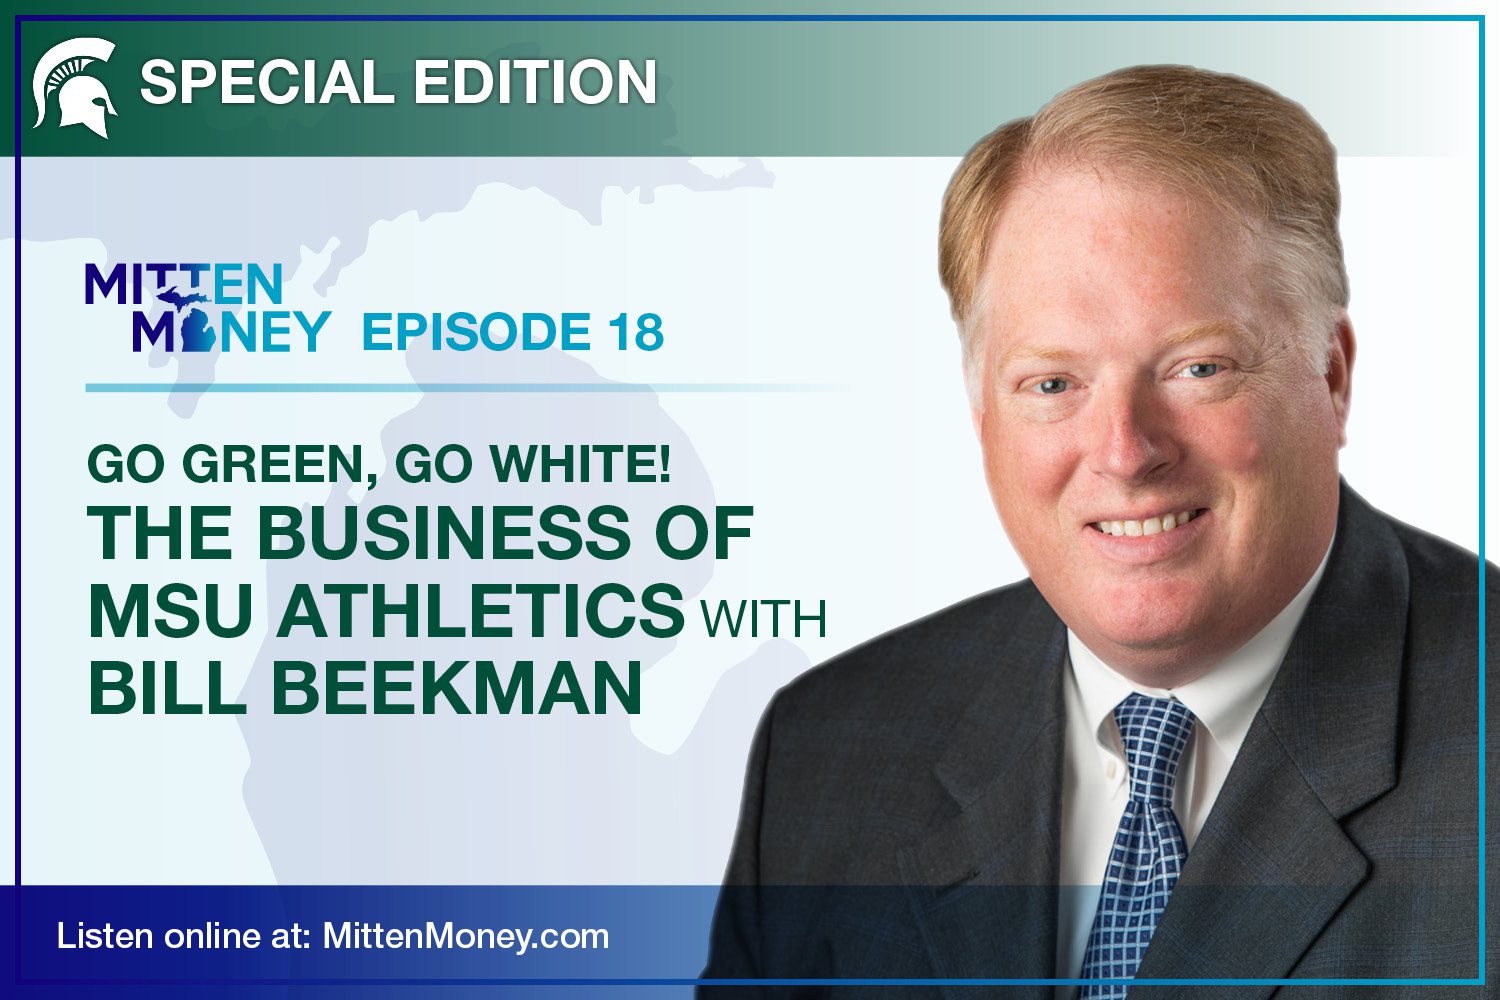 The Business of MSU Athletics with Bill Beekman